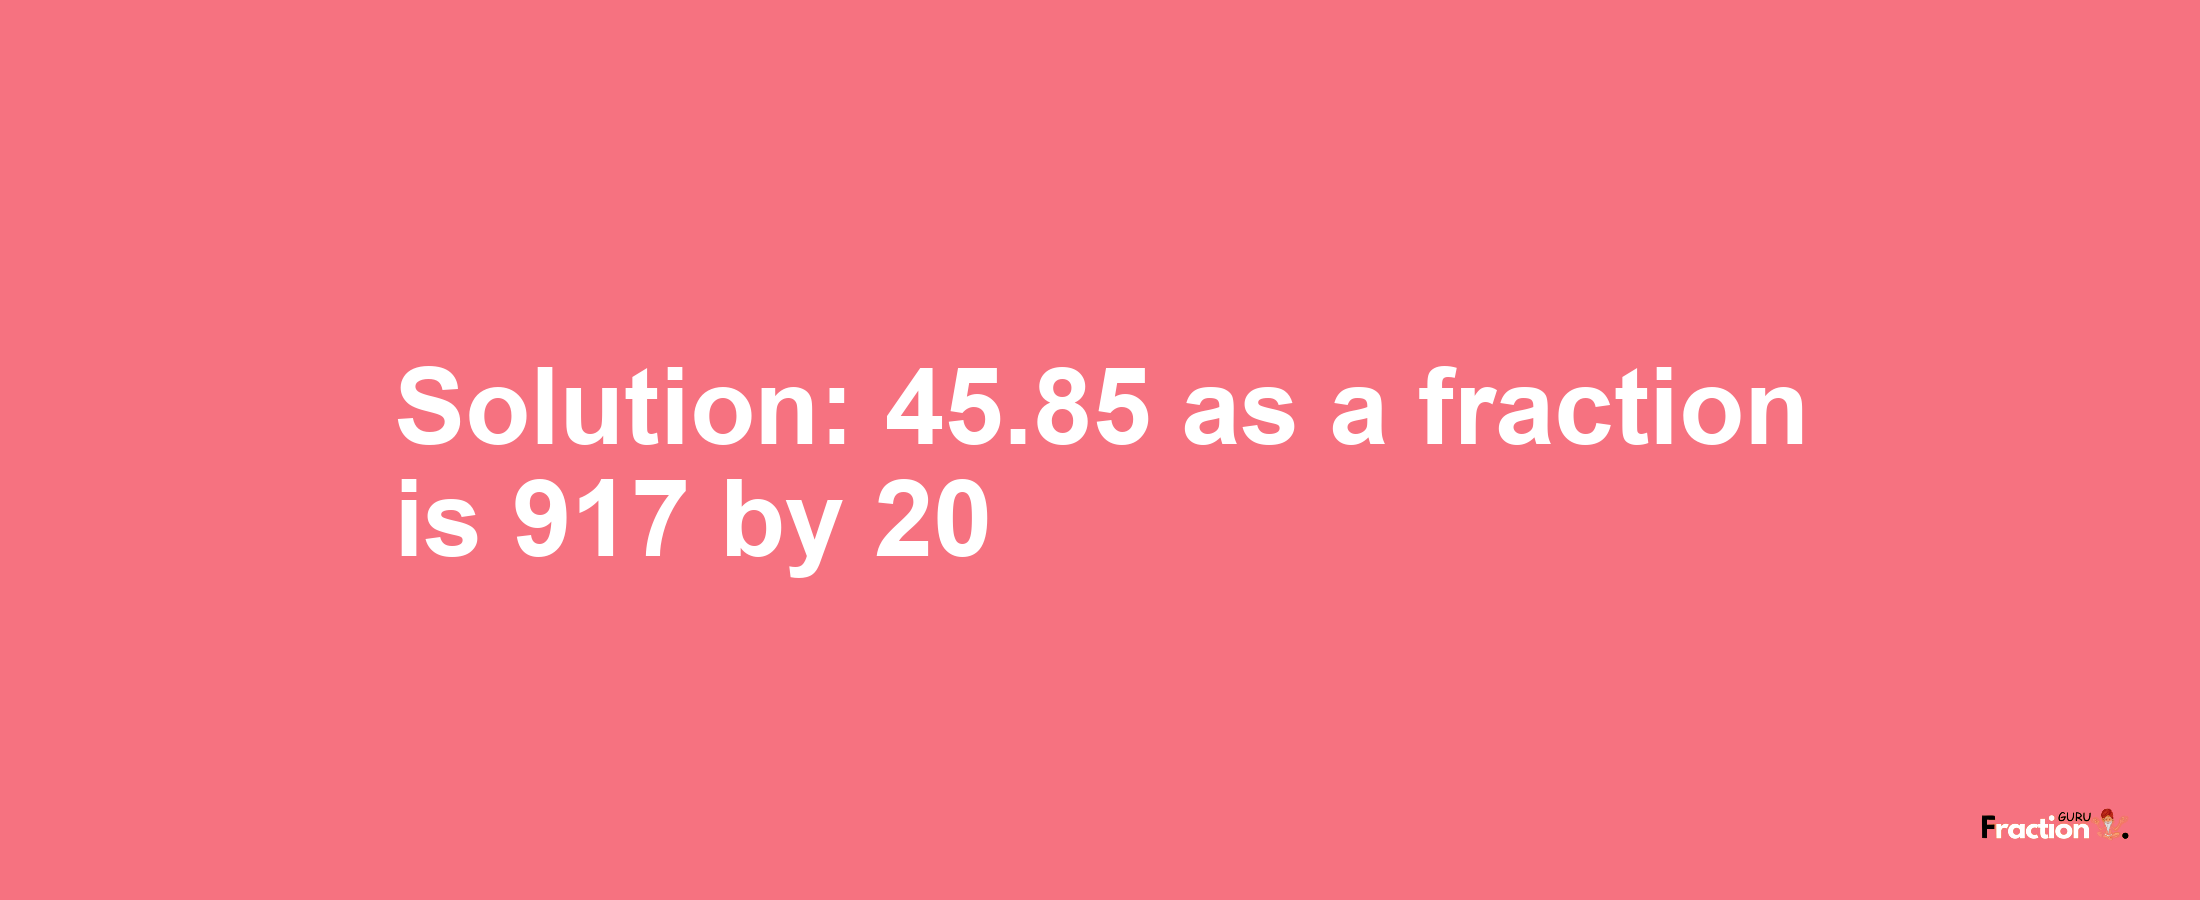 Solution:45.85 as a fraction is 917/20